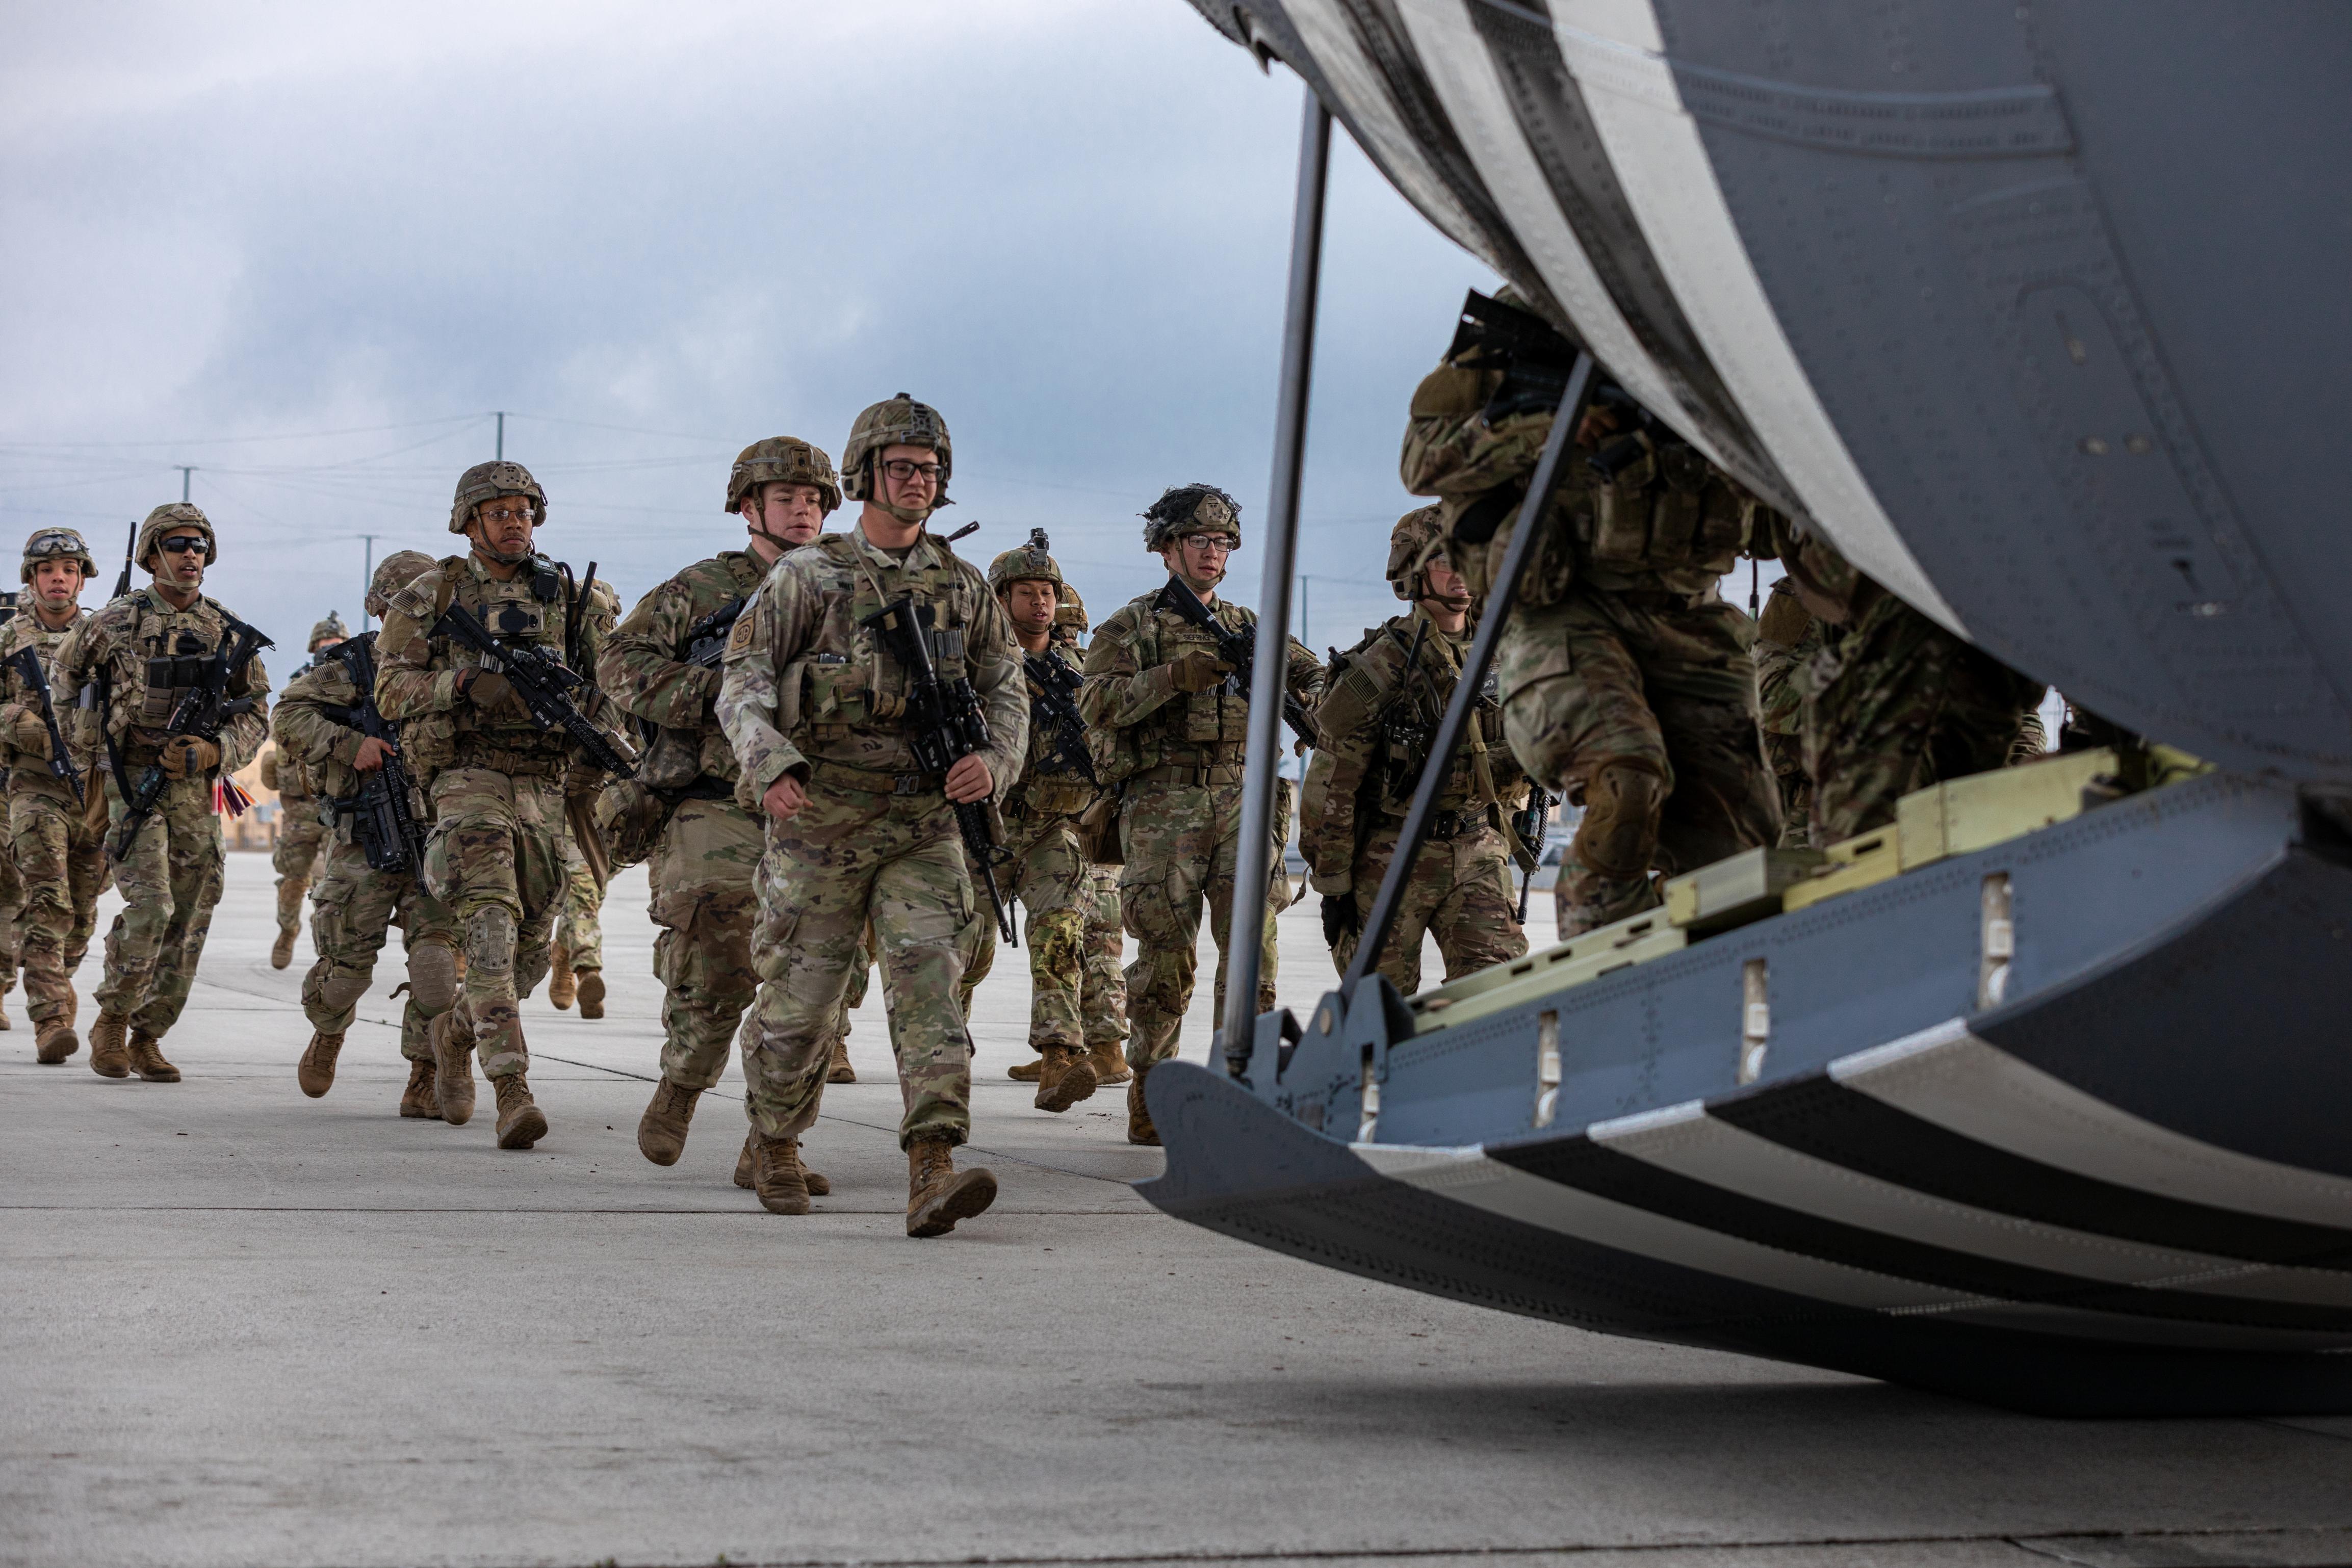 U.S Army Soldiers from the 173rd Airborne Brigade walk through securing an airfield as they conduct squad drills at Aviano Air Base, Italy, March 7, 2023. Squad drills are good practice to prepare for the no-notice rapid deployment capabilities of U.S. Africa Command’s North and West Africa Response Force, which is made up of elements of the 173rd Airborne Brigade and U.S. Army Southern European Task Force, Africa (SETAF-AF), from Vicenza, Italy. (U.S. Army photo by Sgt. Matthew Prewitt)